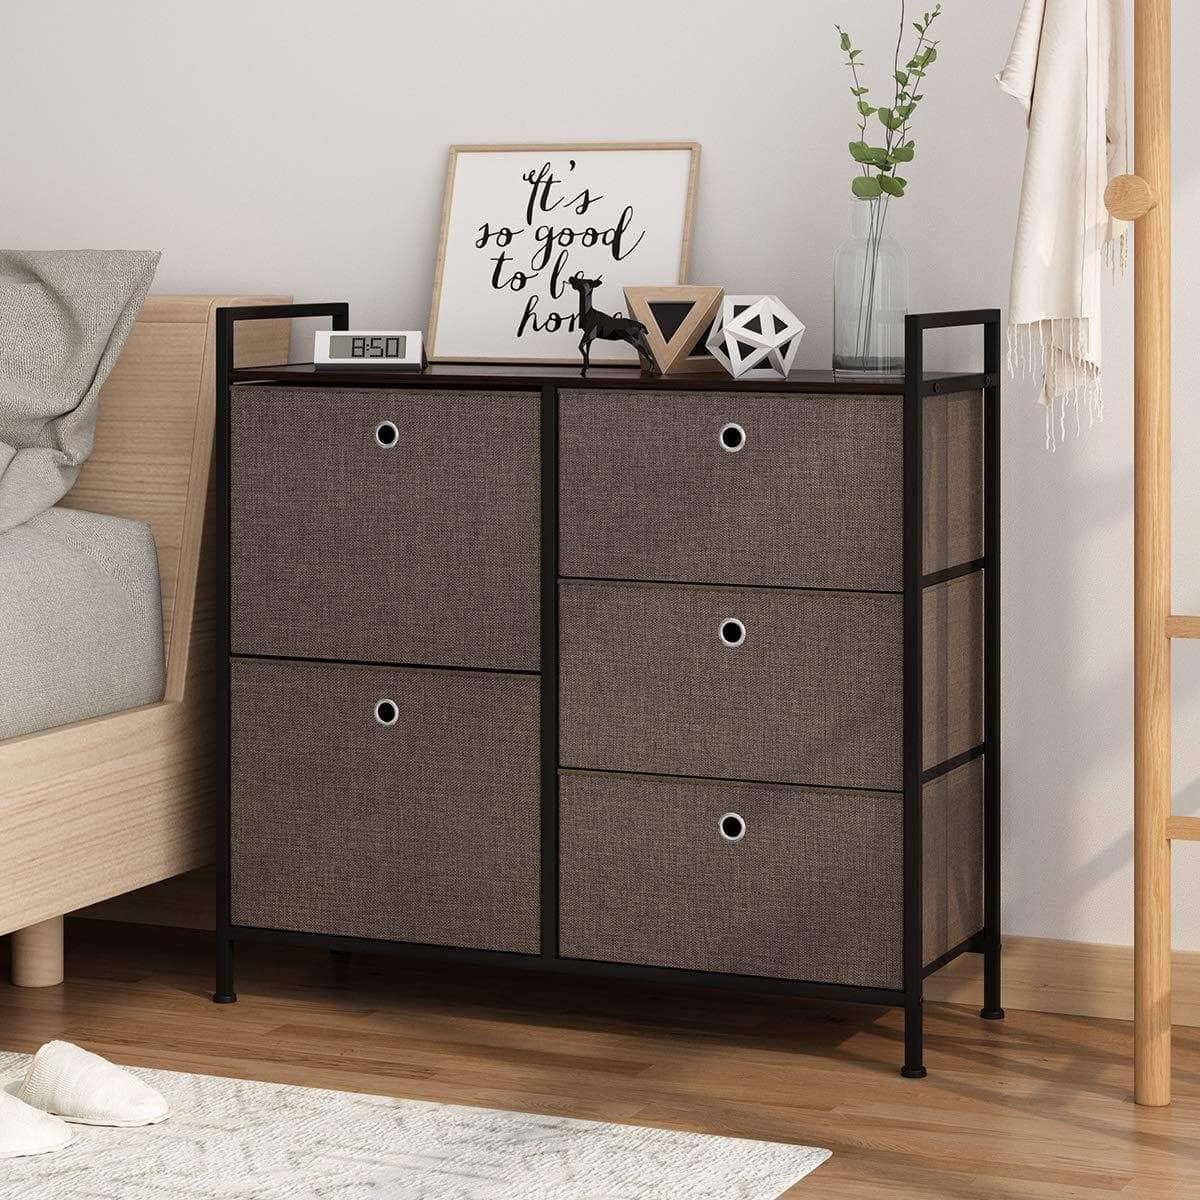 Organize with langria faux linen wide dresser storage tower with 5 easy pull drawer and handles sturdy metal frame and wooden table organizer unit for guest dorm room closet hallway office area dark brown